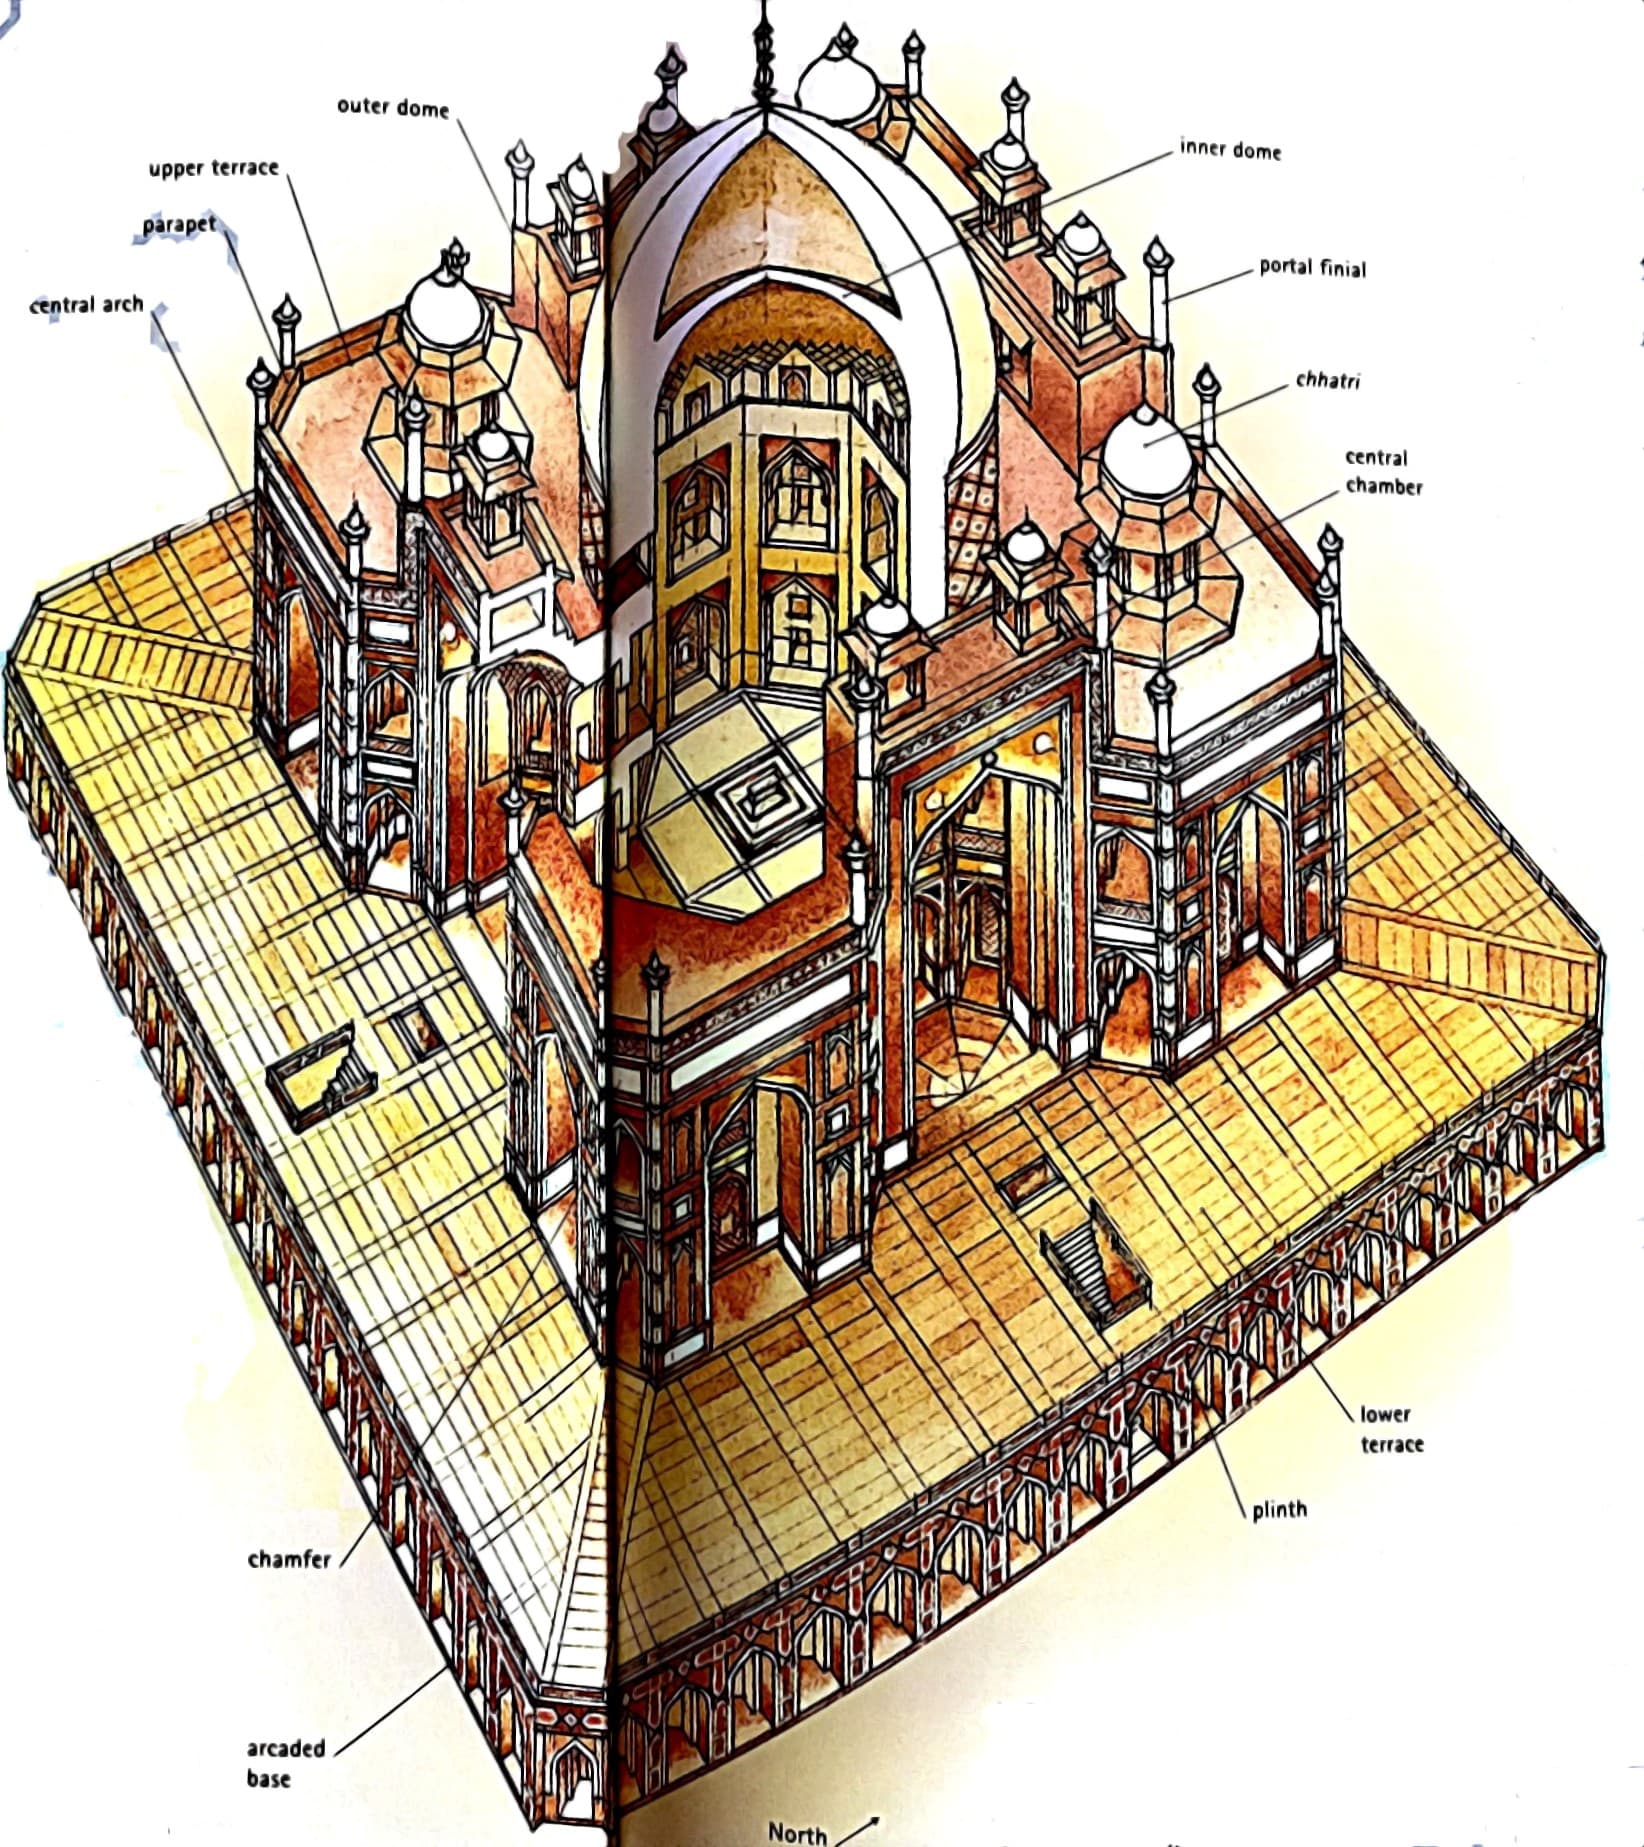 Sectional View of Humayun's Tomb (PC - Great Monuments of India)